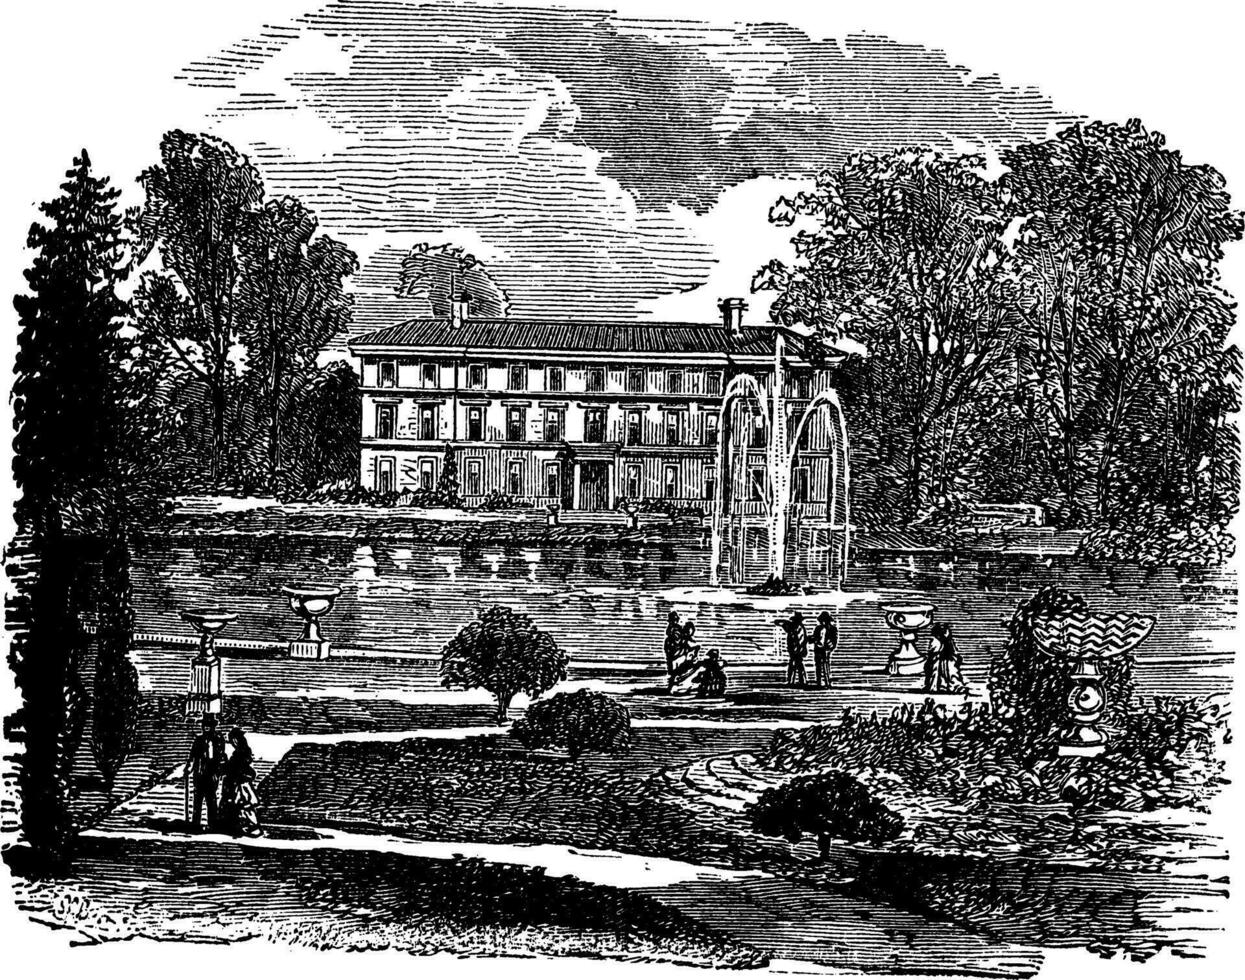 The Royal Botanic Garden and a view of Museum No. 1 vintage engraving vector